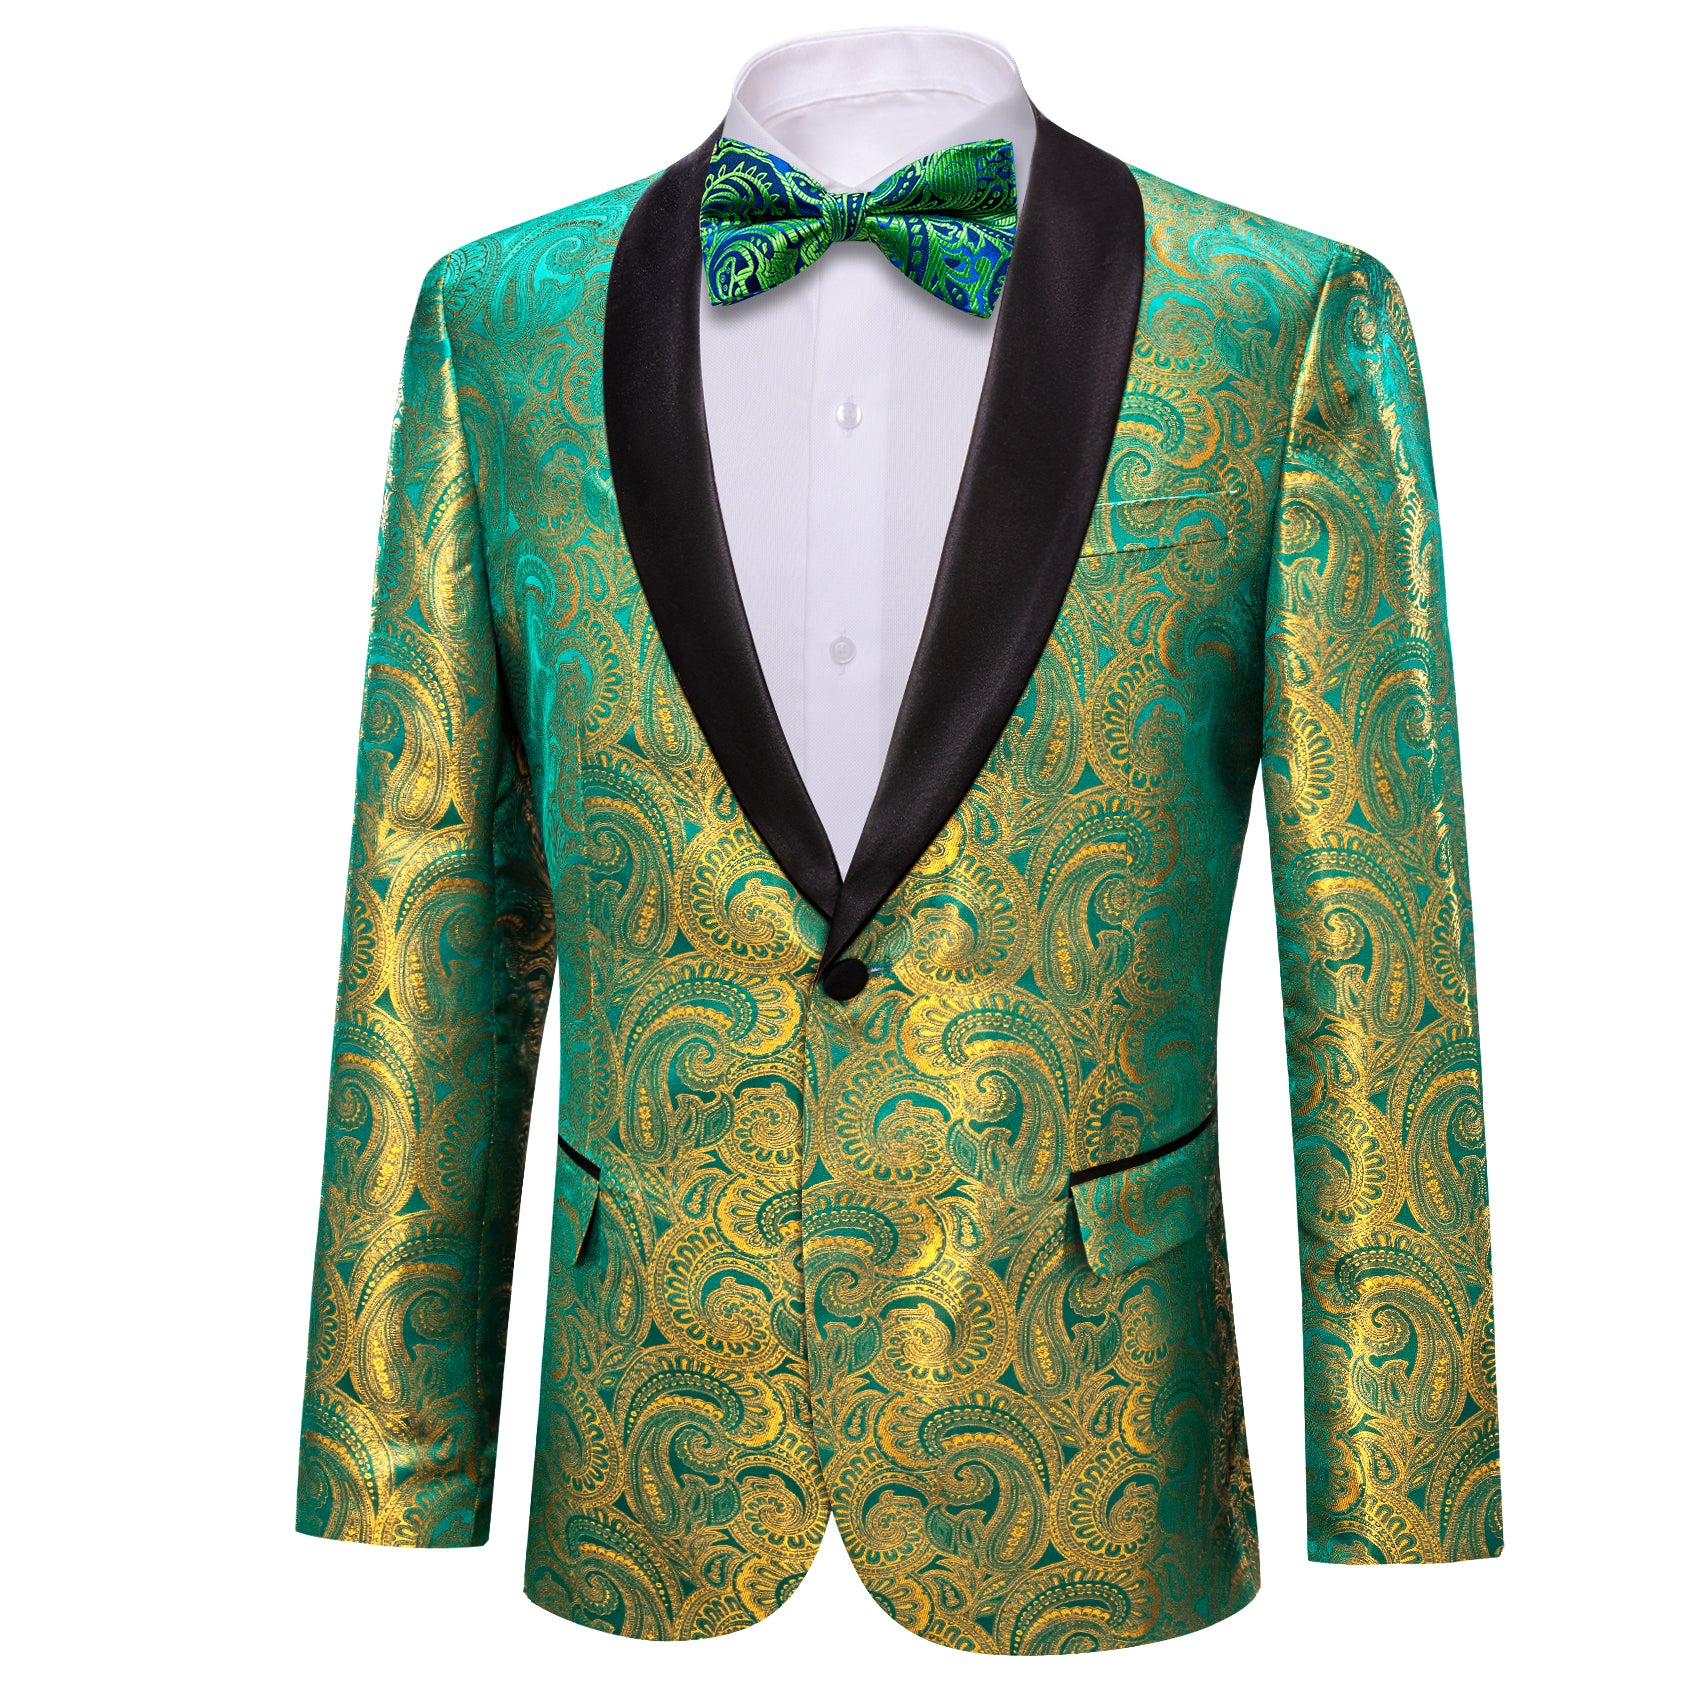 Barry.wang Shawl Collar Suit Men's Bright Green Floral Suit Jacket